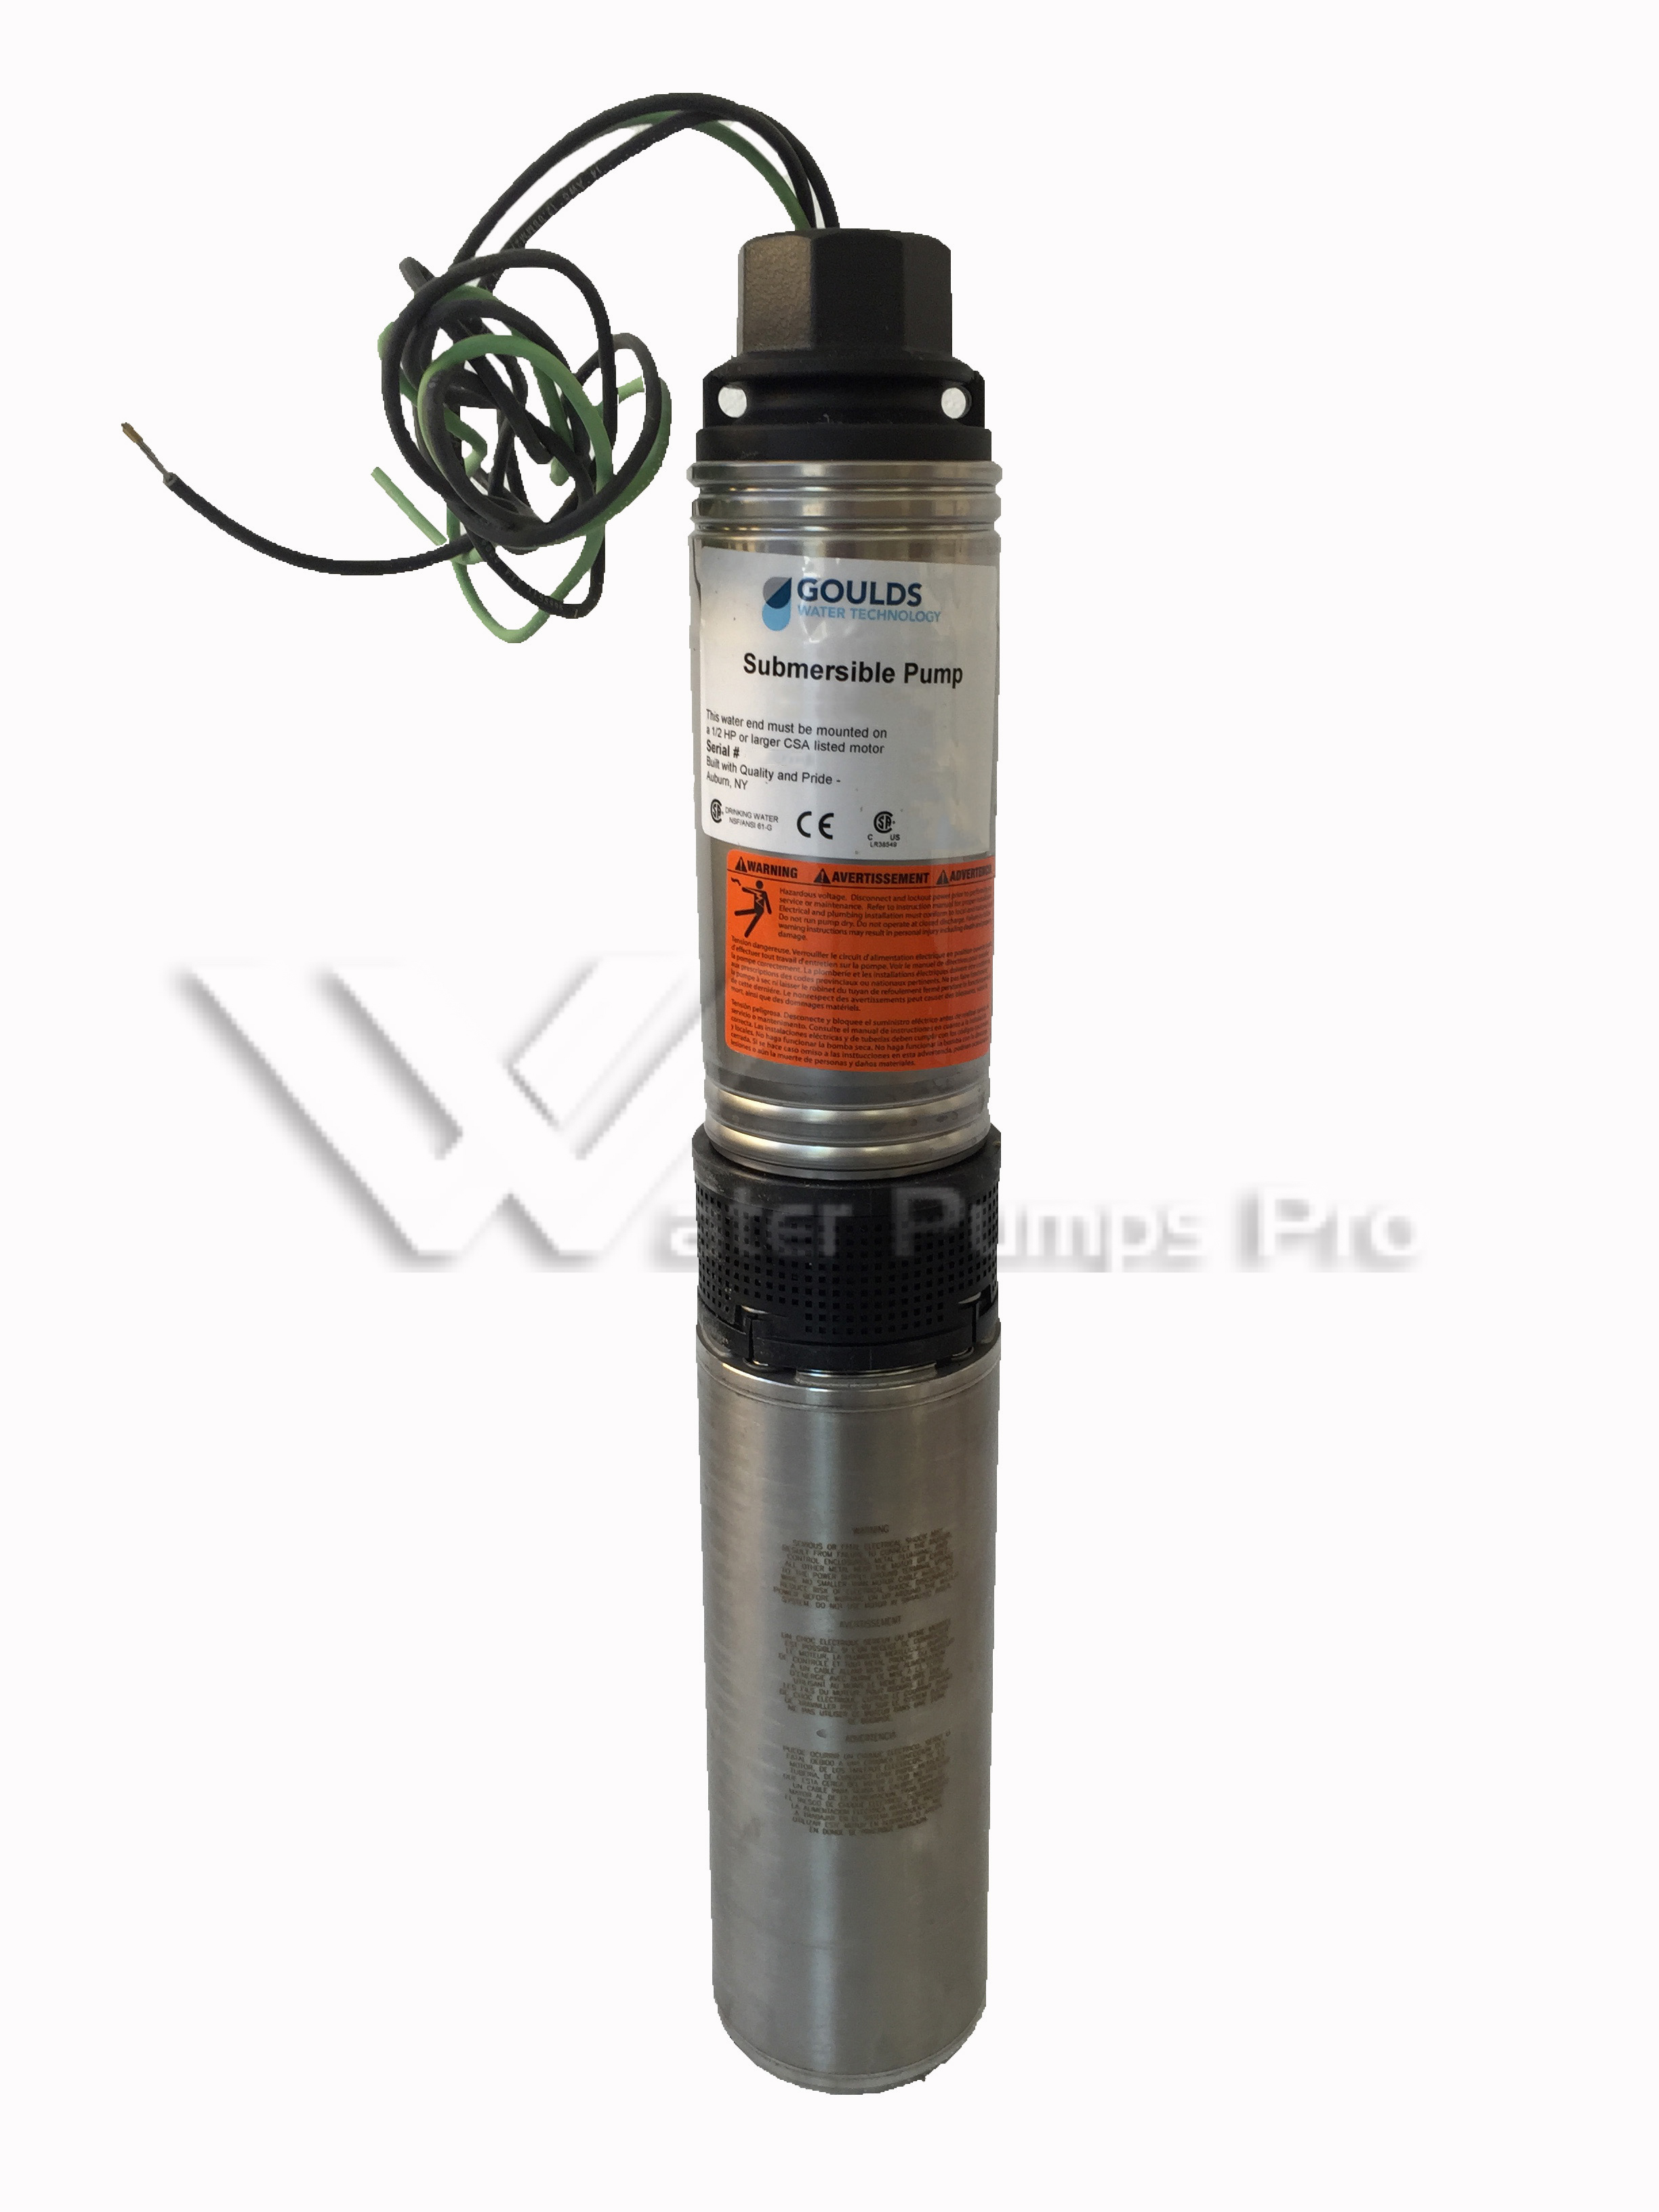 Goulds 5HS05422C Submersible Water Well Pump 1/2HP 230V 2Wire